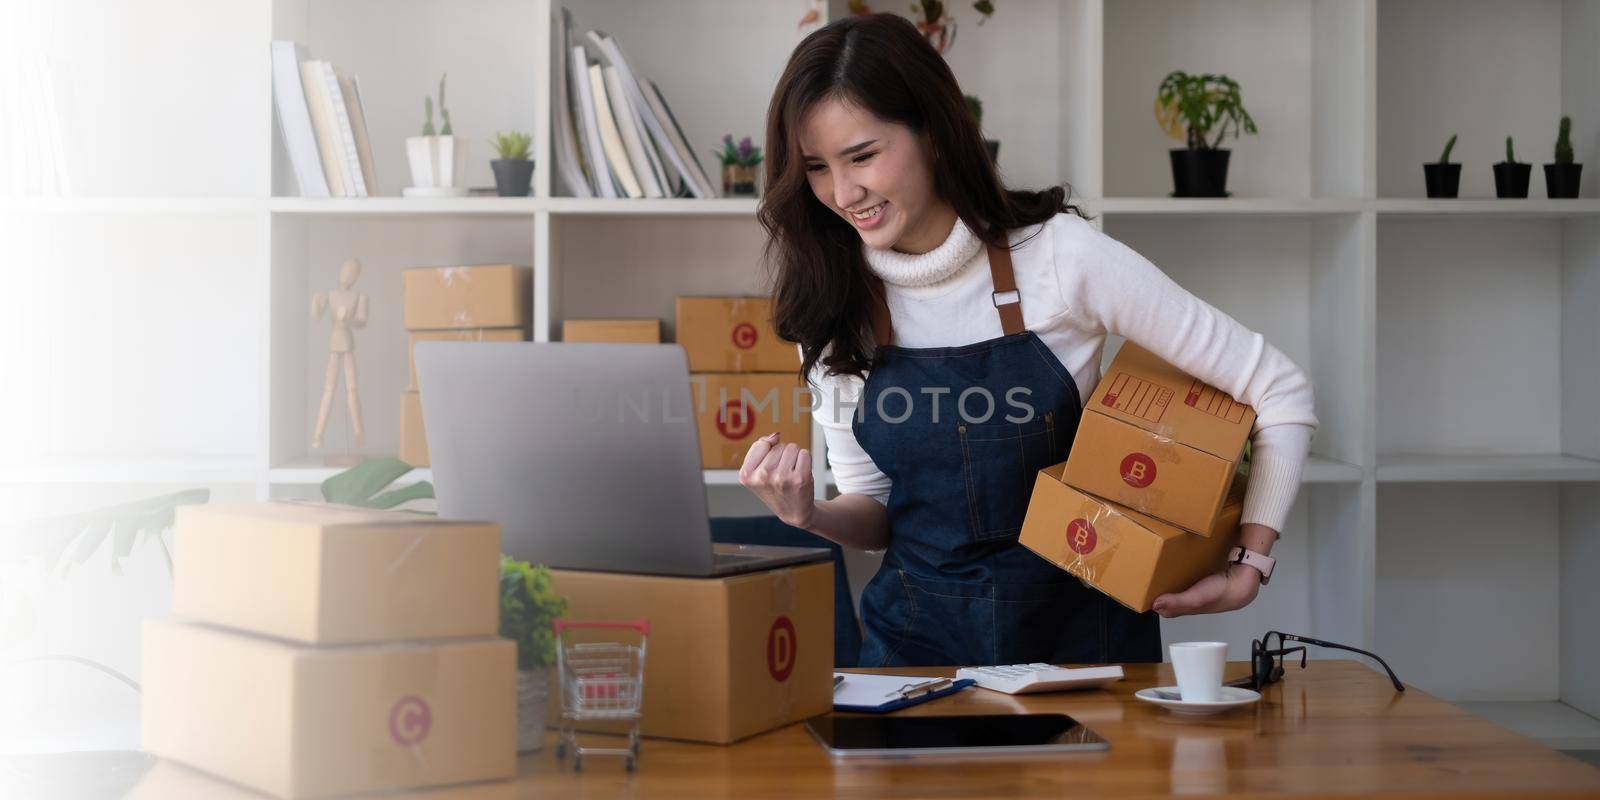 Business owner excite when got an order from her online shop. Successful SME entrepreneur concept